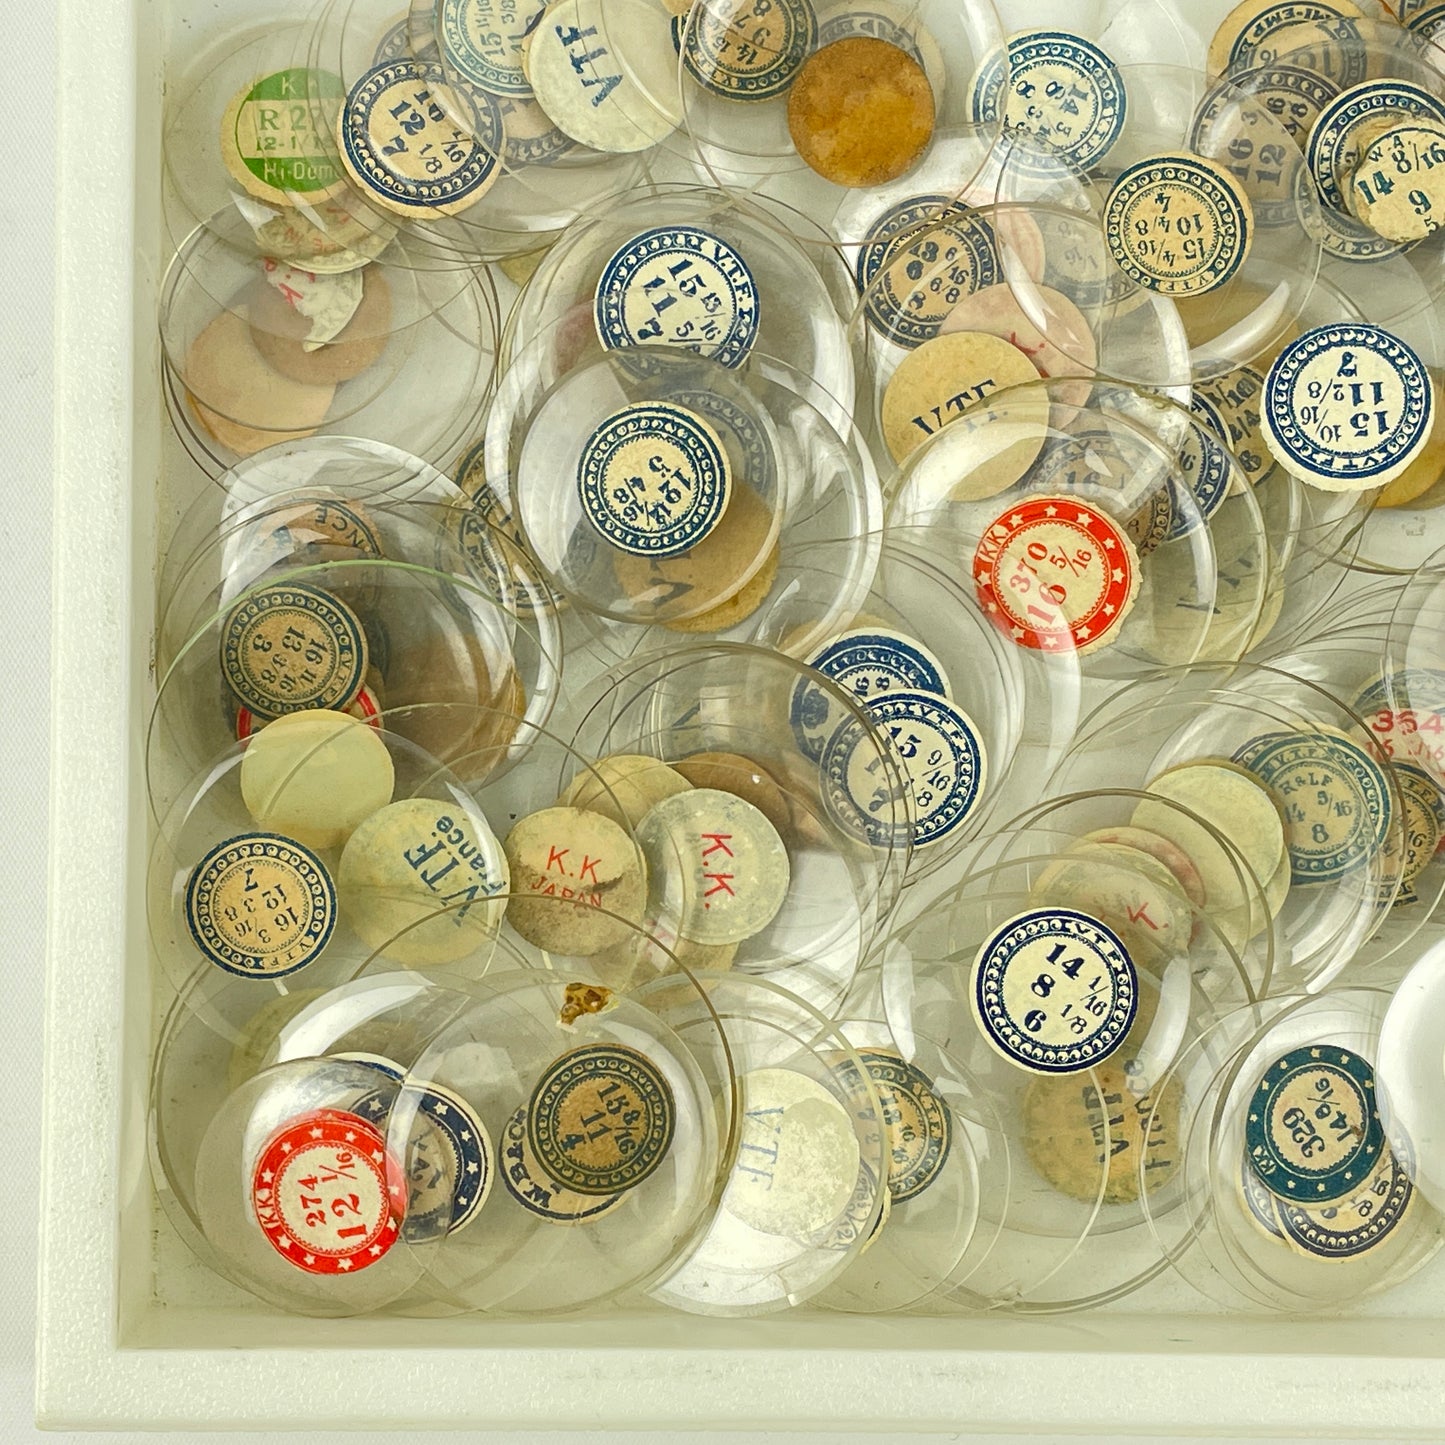 Lot 108- Watchmaker’s Selection of 300 Glass NOS Pocket Watch Crystals